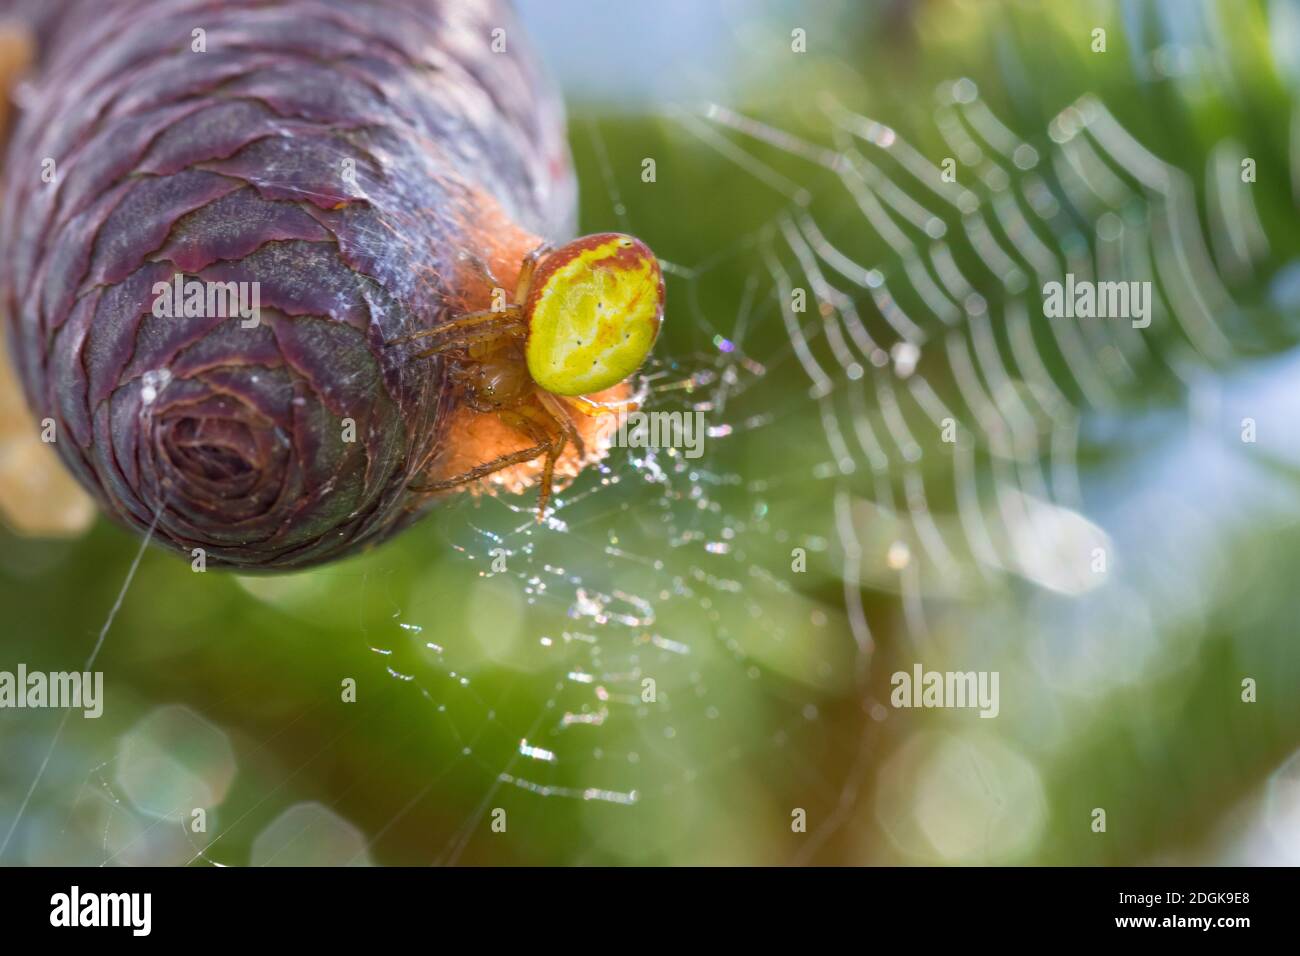 Araneae High Resolution Stock Photography and Images - Alamy